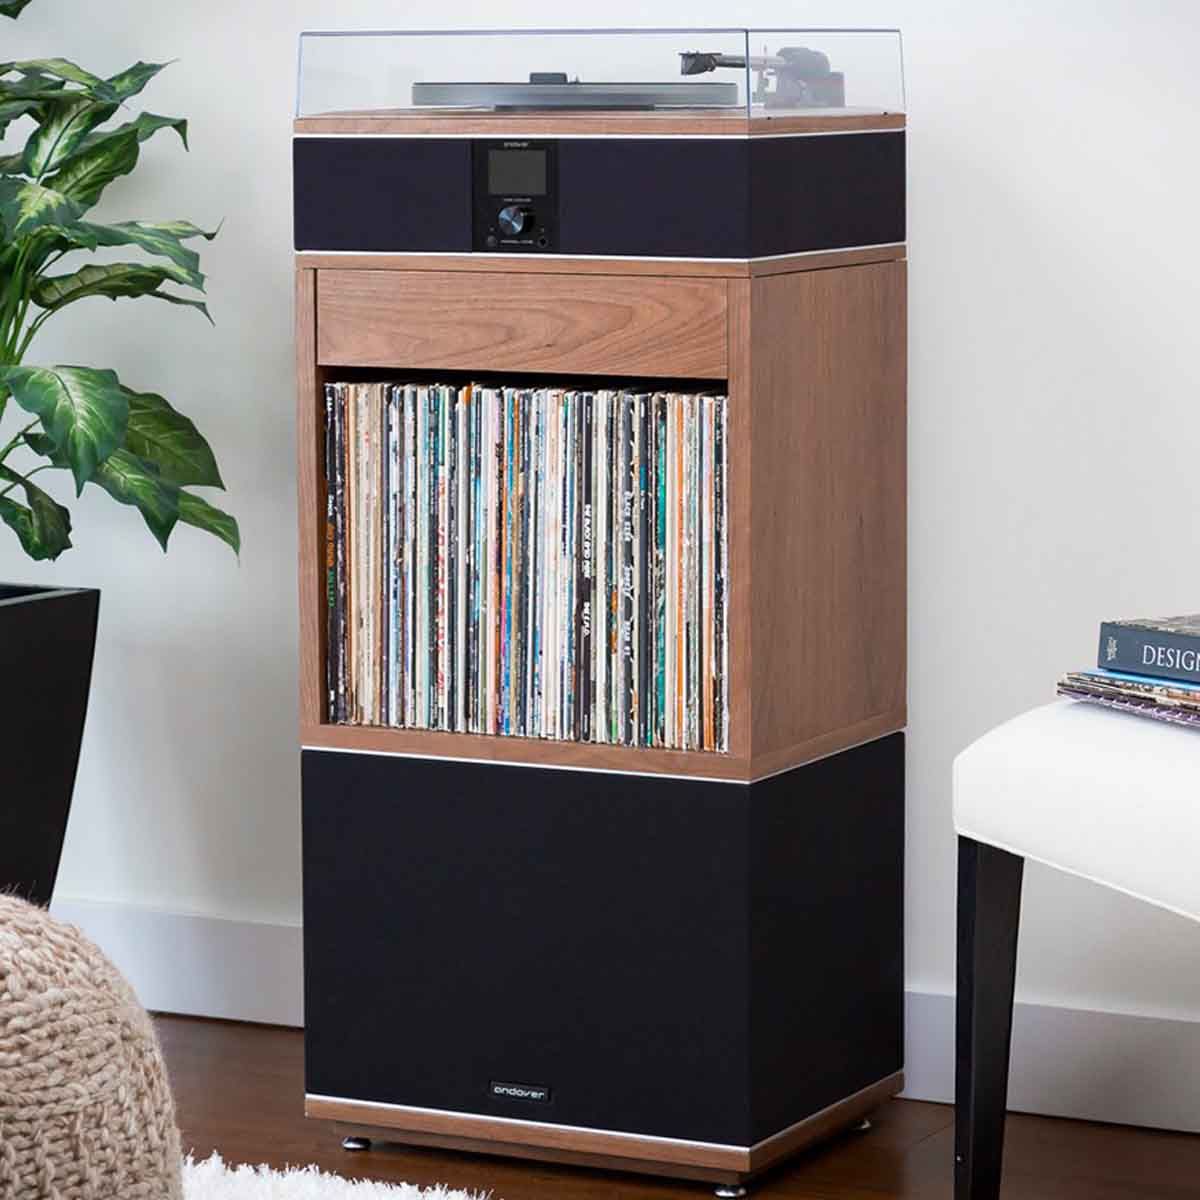 Andover Audio Model-One Lower Stand- lifestyle image with turntable and subwoofer